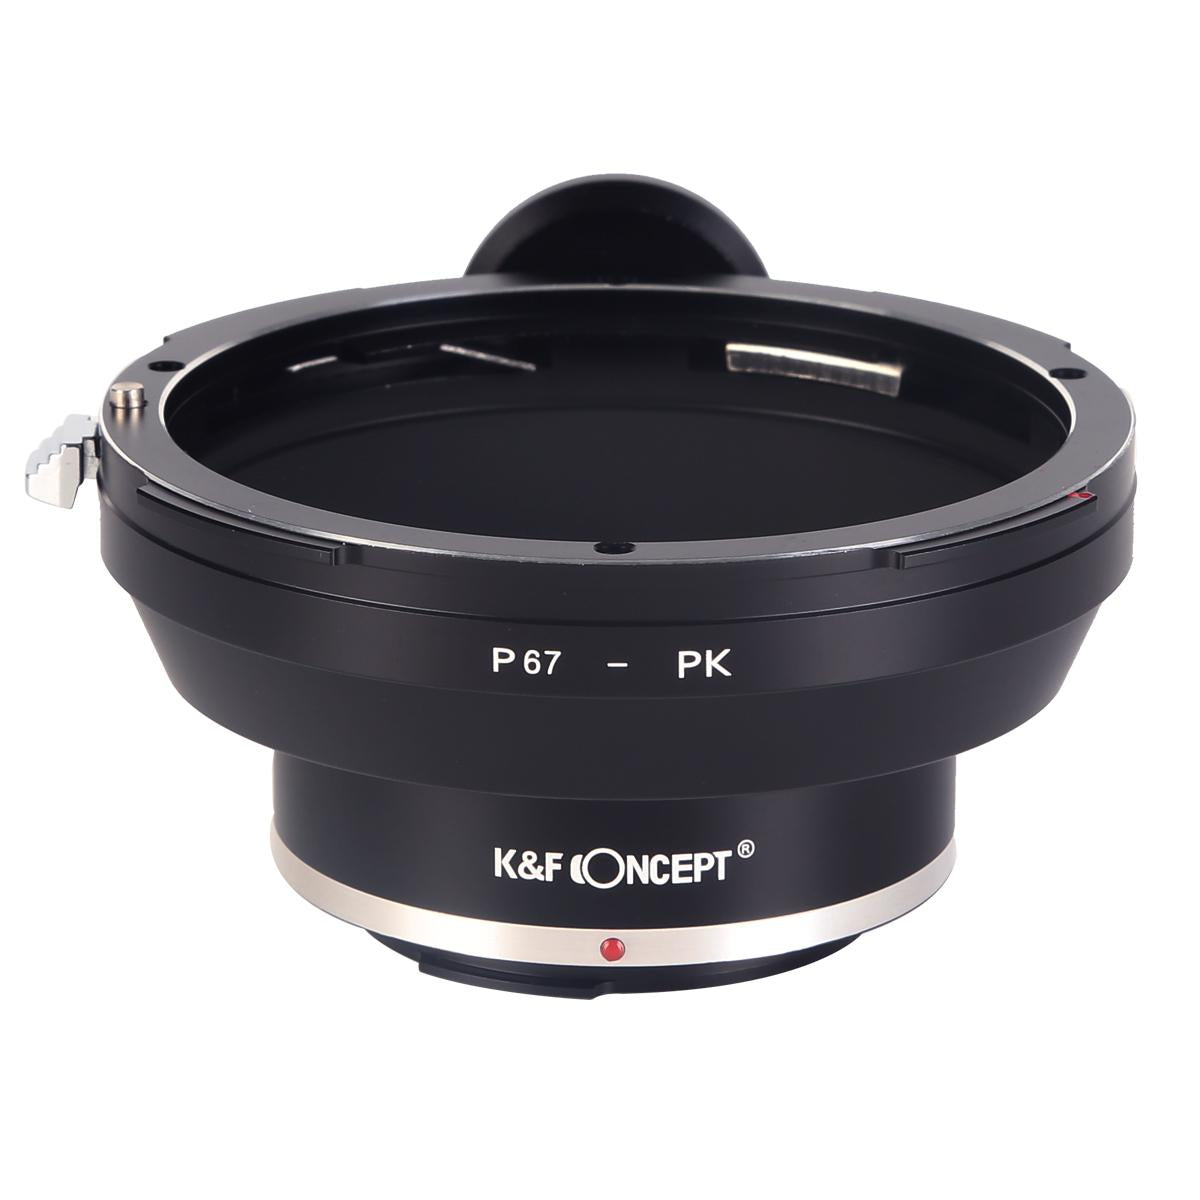 Pentax 67 Lenses to Pentax K Camera Mount Adapter with tripod Mount